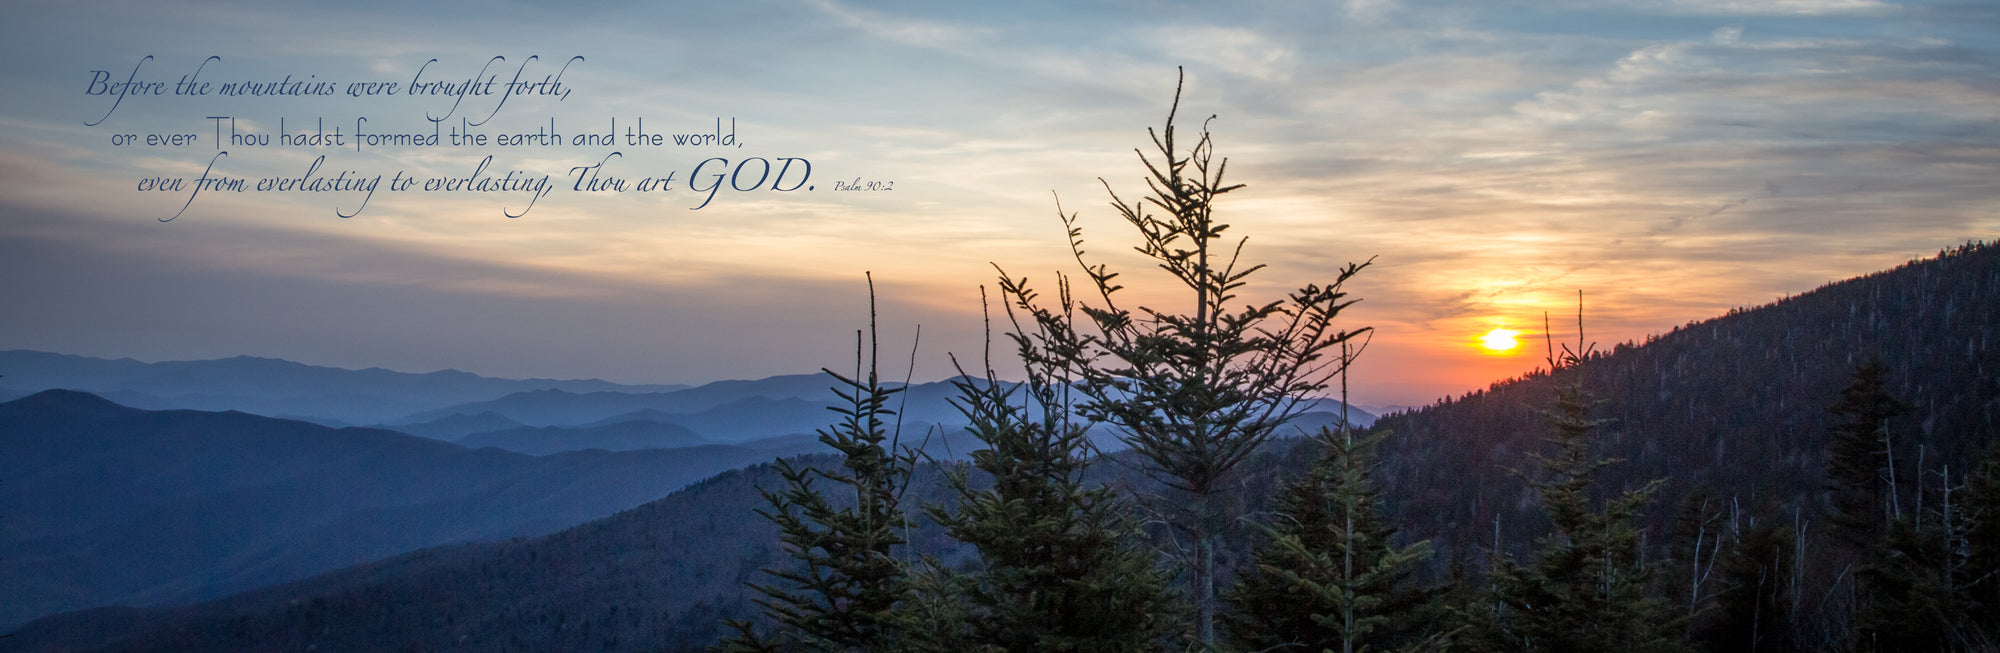 Blue and yellow sunset at Clingman's Dome in the Great Smoky Mountains, Tennessee with scripture verse